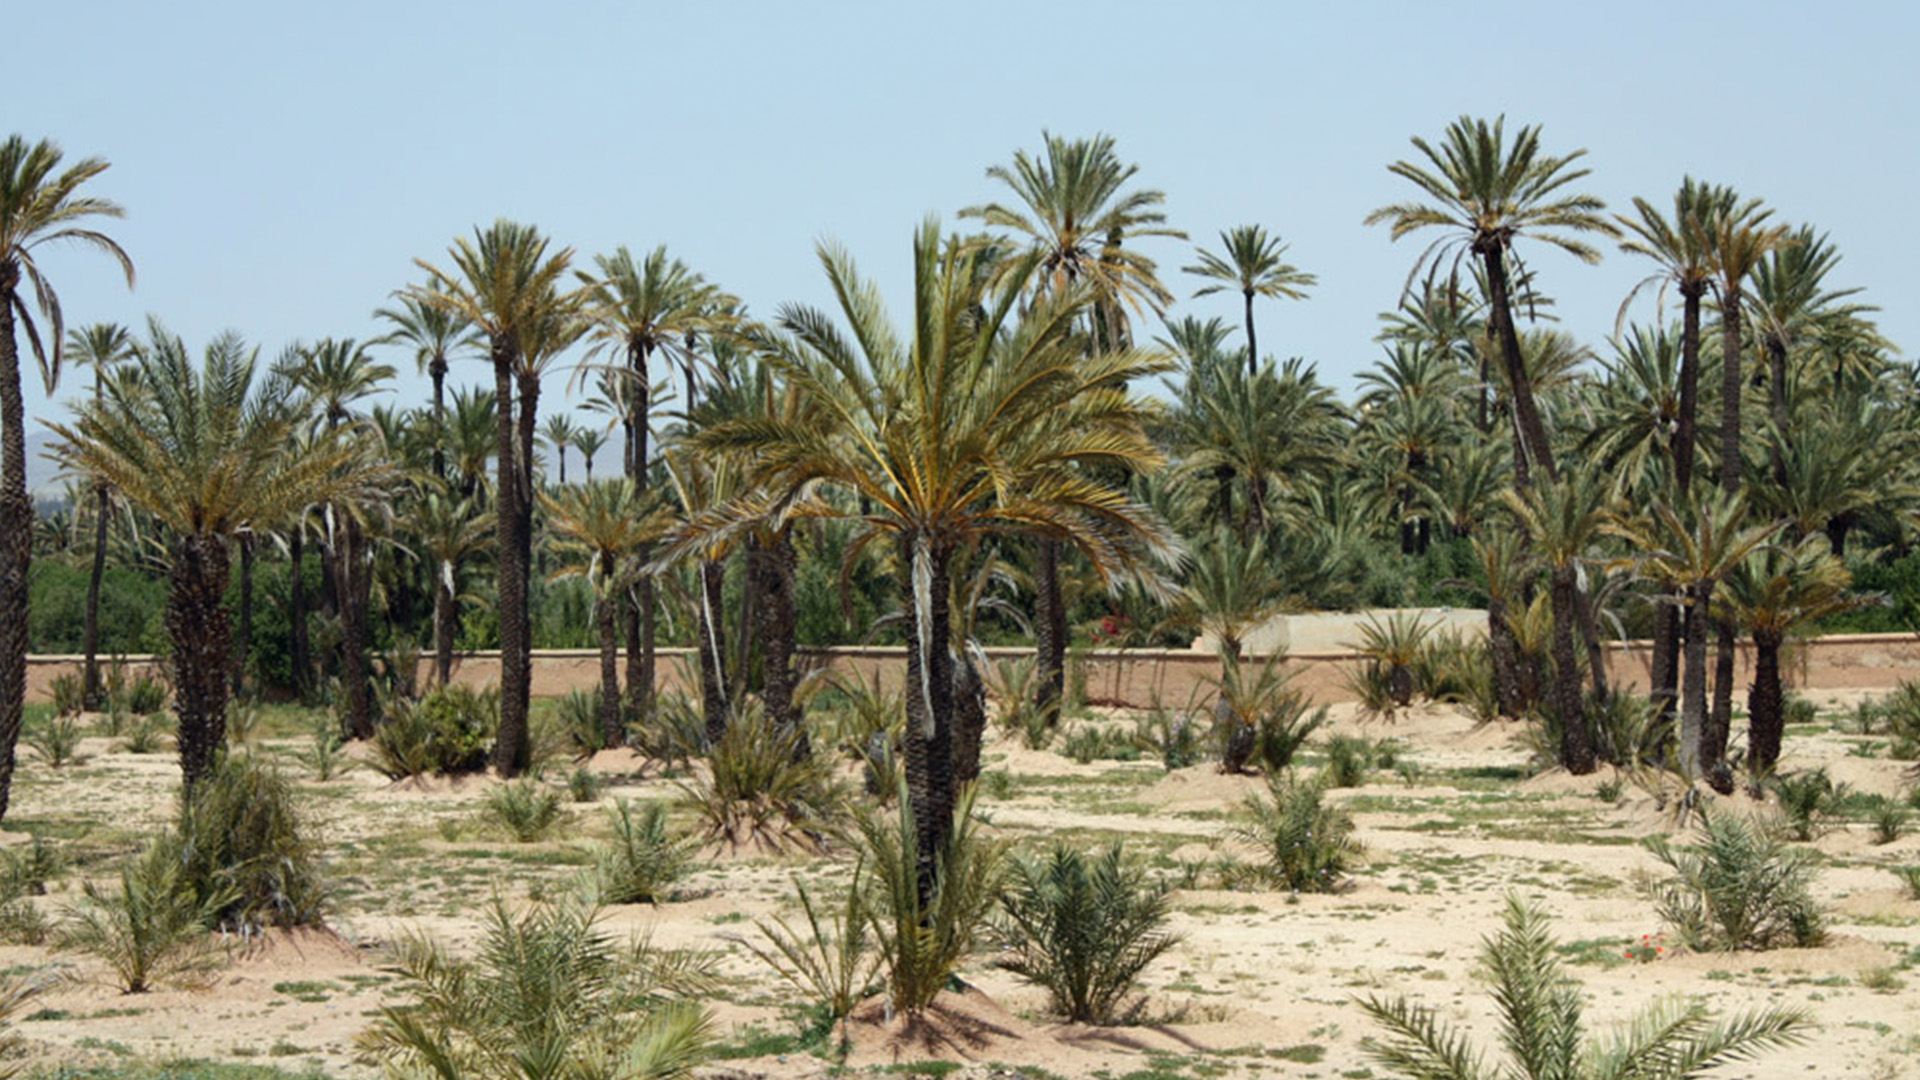 The tranquil beauty and lush oasis of Marrakesh's Palmeraie.